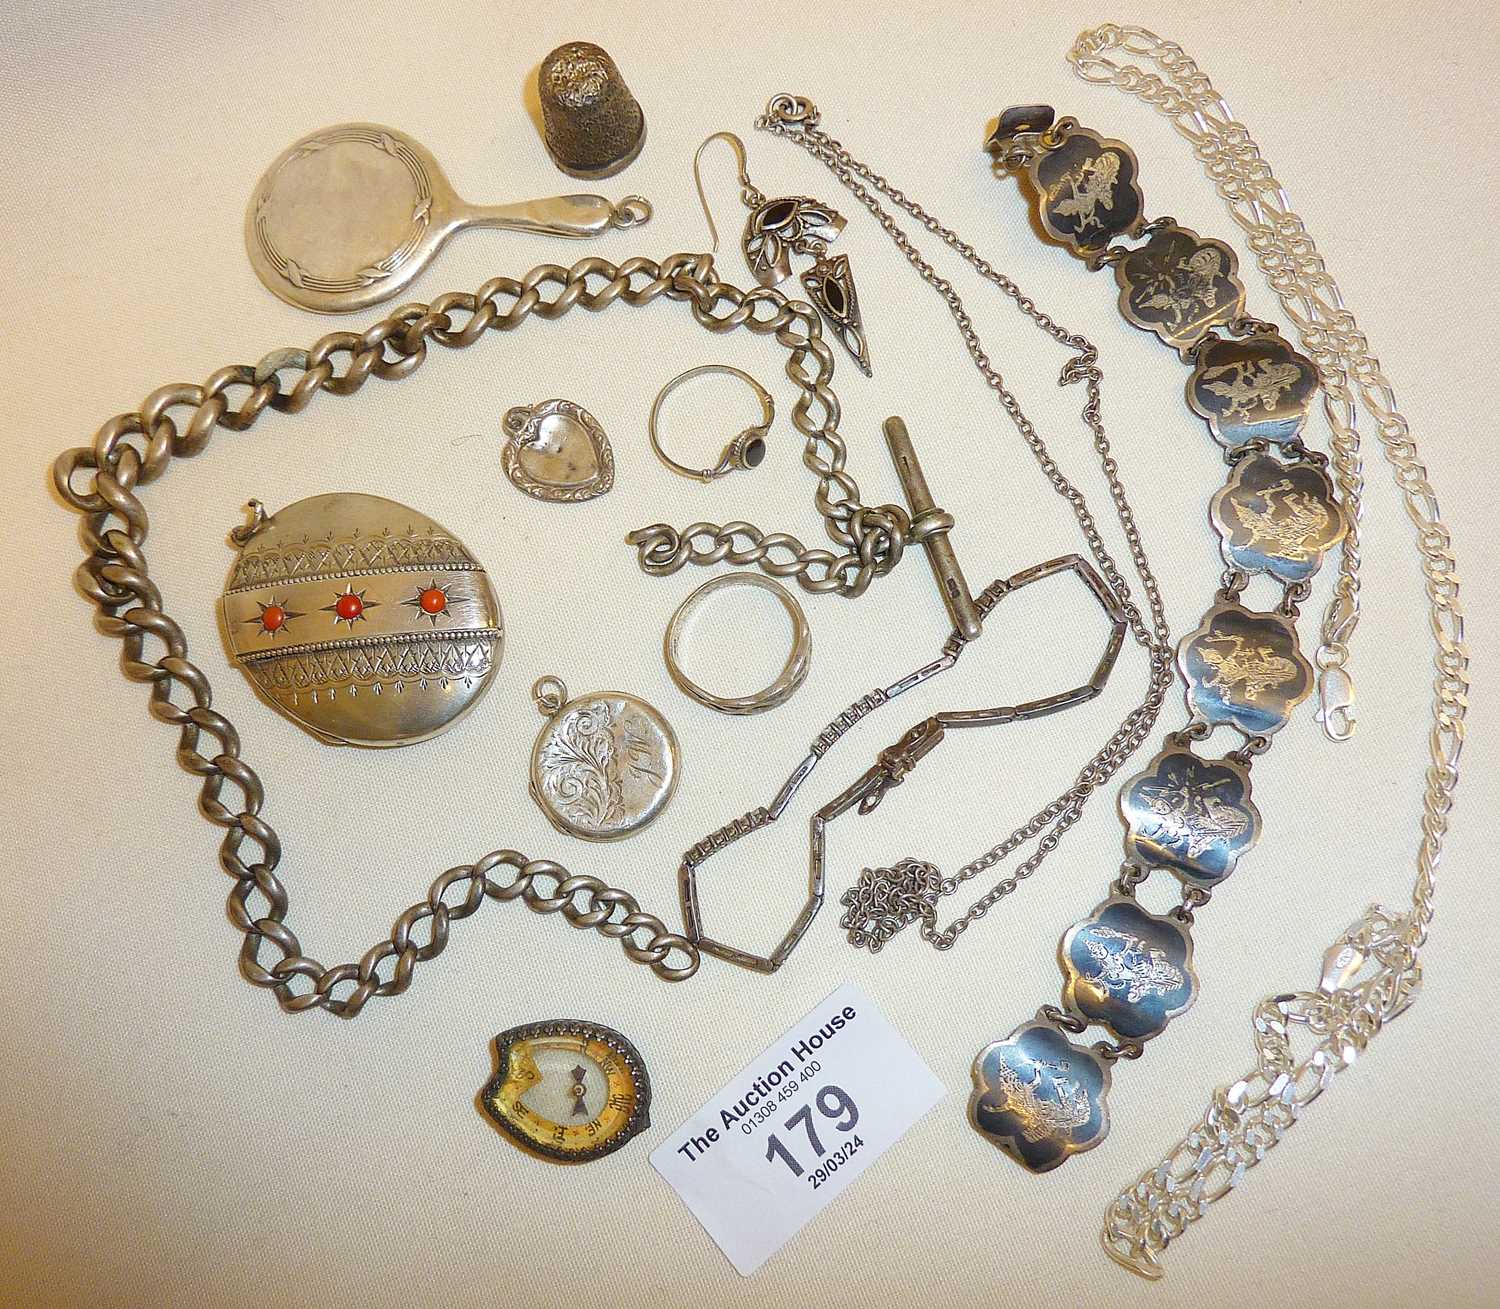 Silver jewellery, some antique, inc. an albert watch chain & compass fob (missing loop) - Image 4 of 4